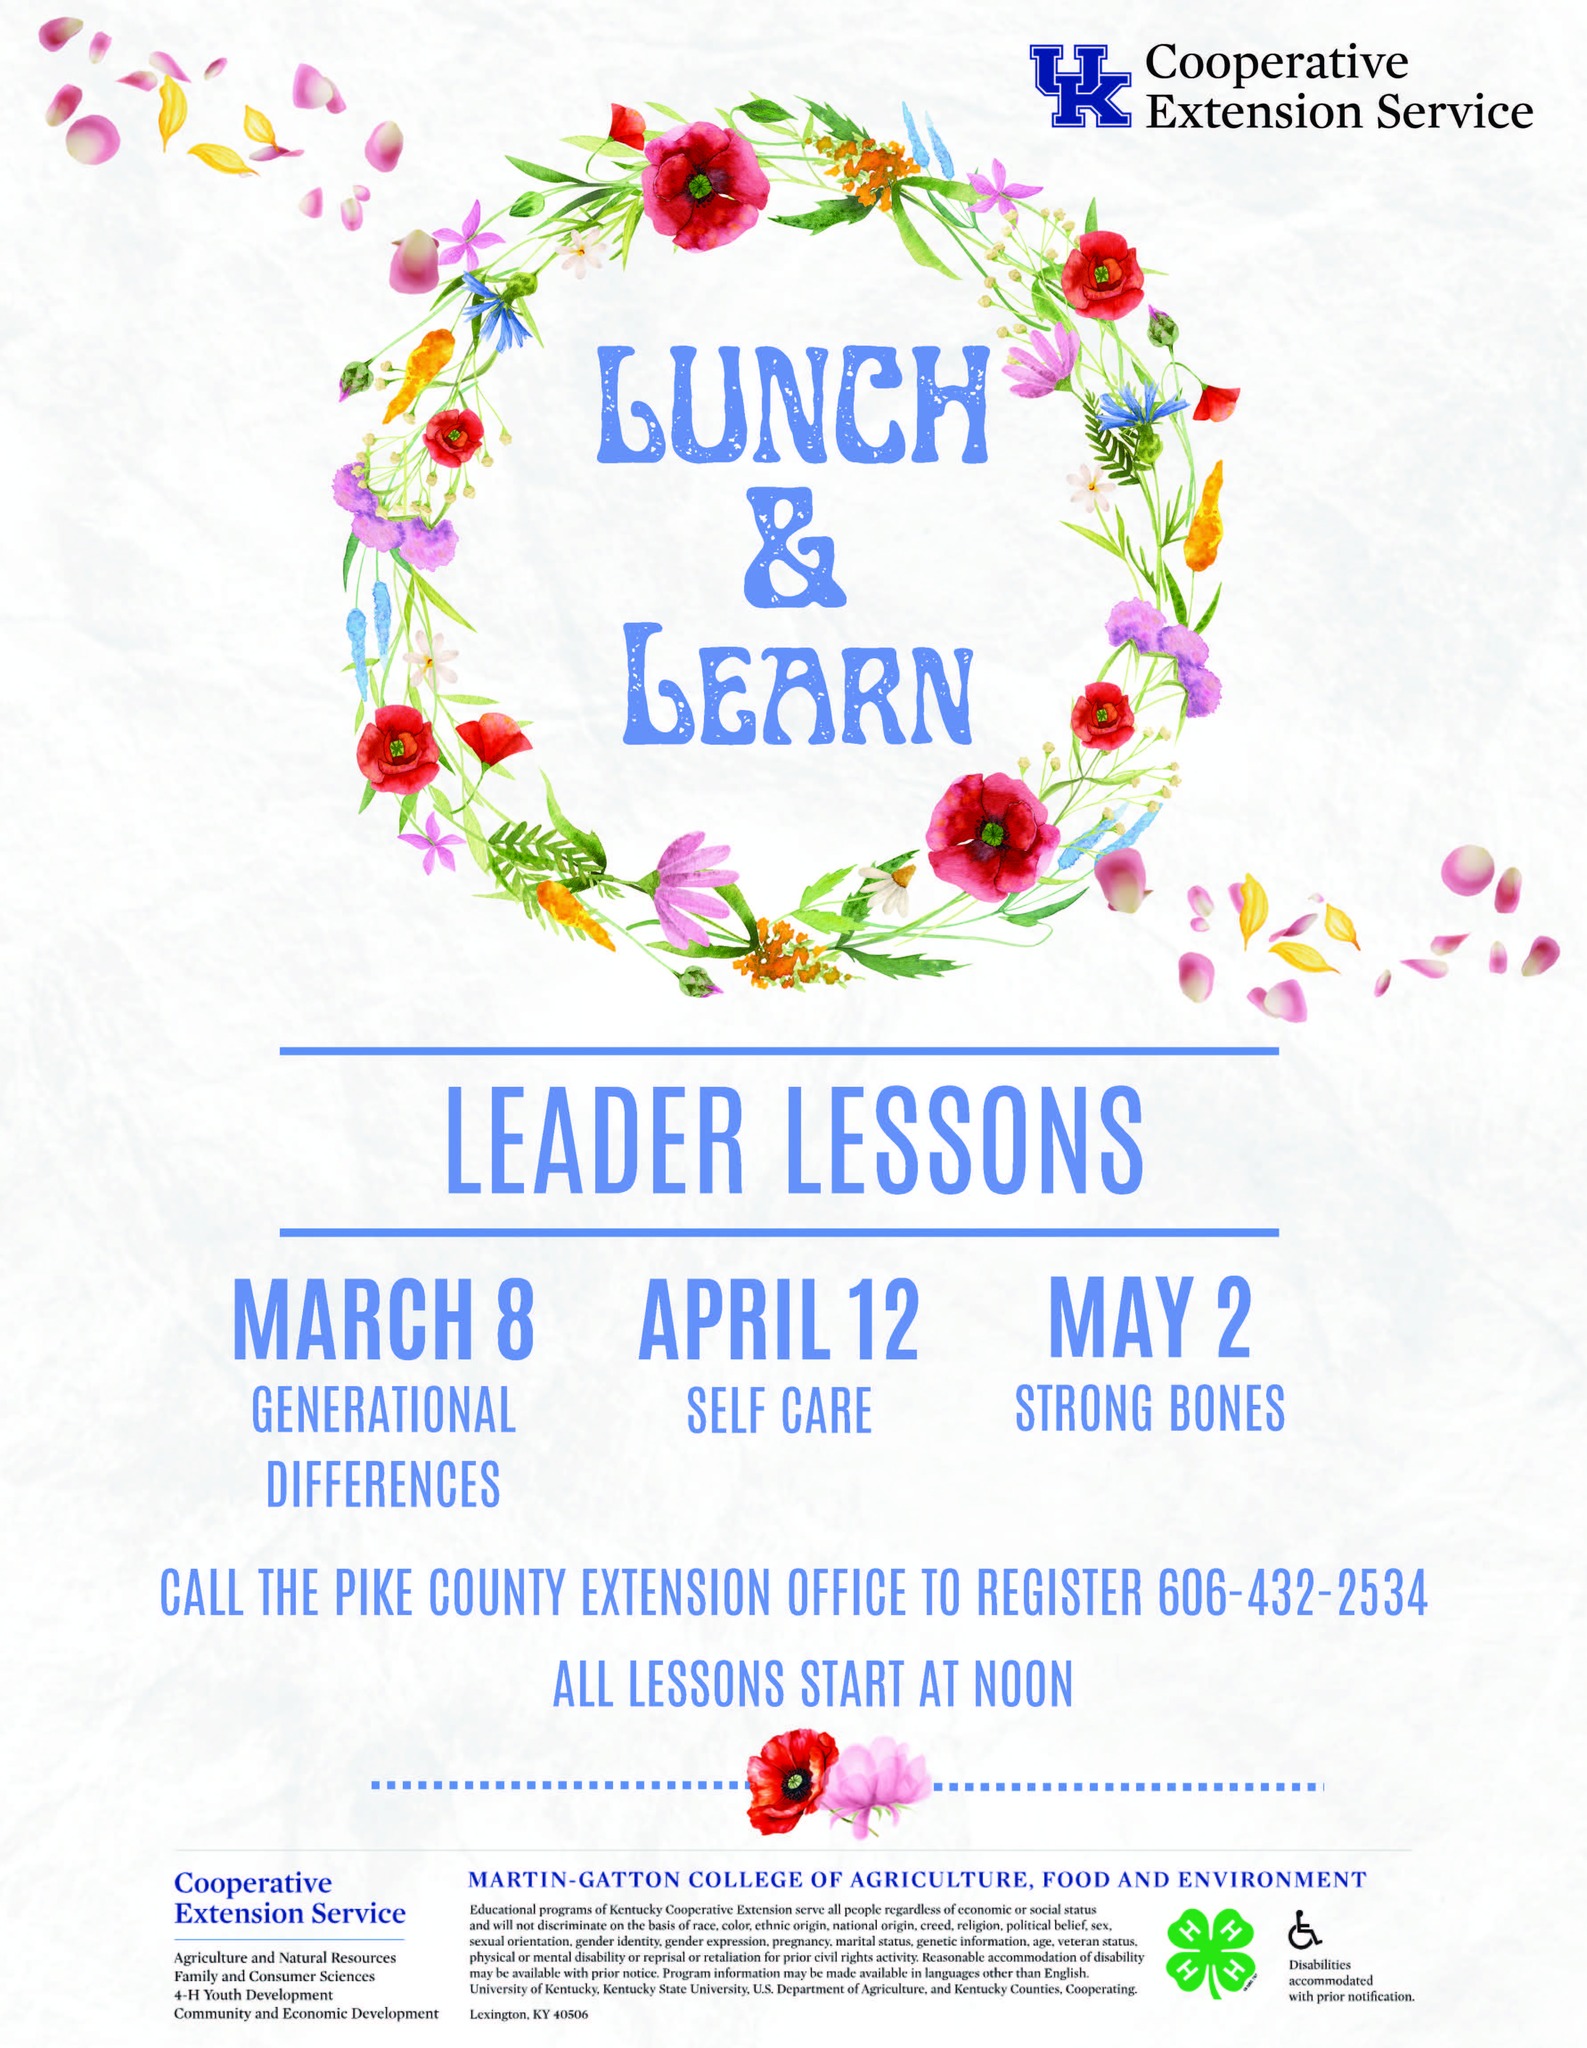 Lunch & Learn Lessons